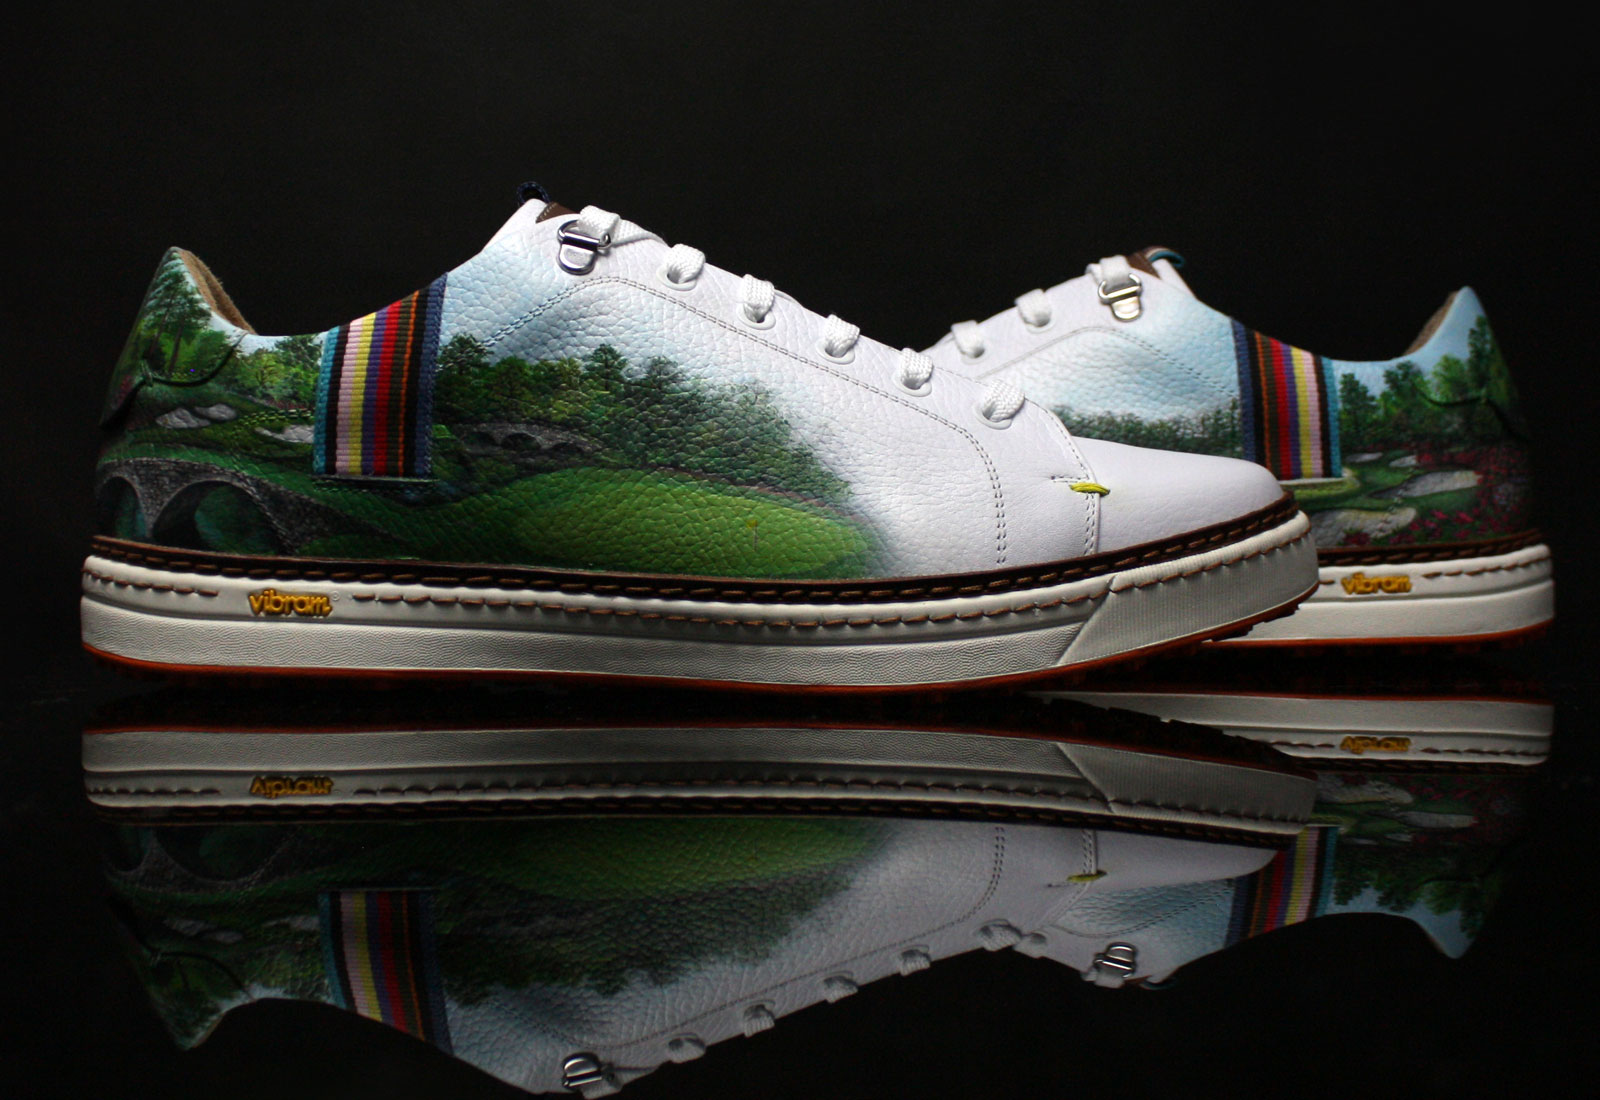 Hand-painted Masters golf shoe